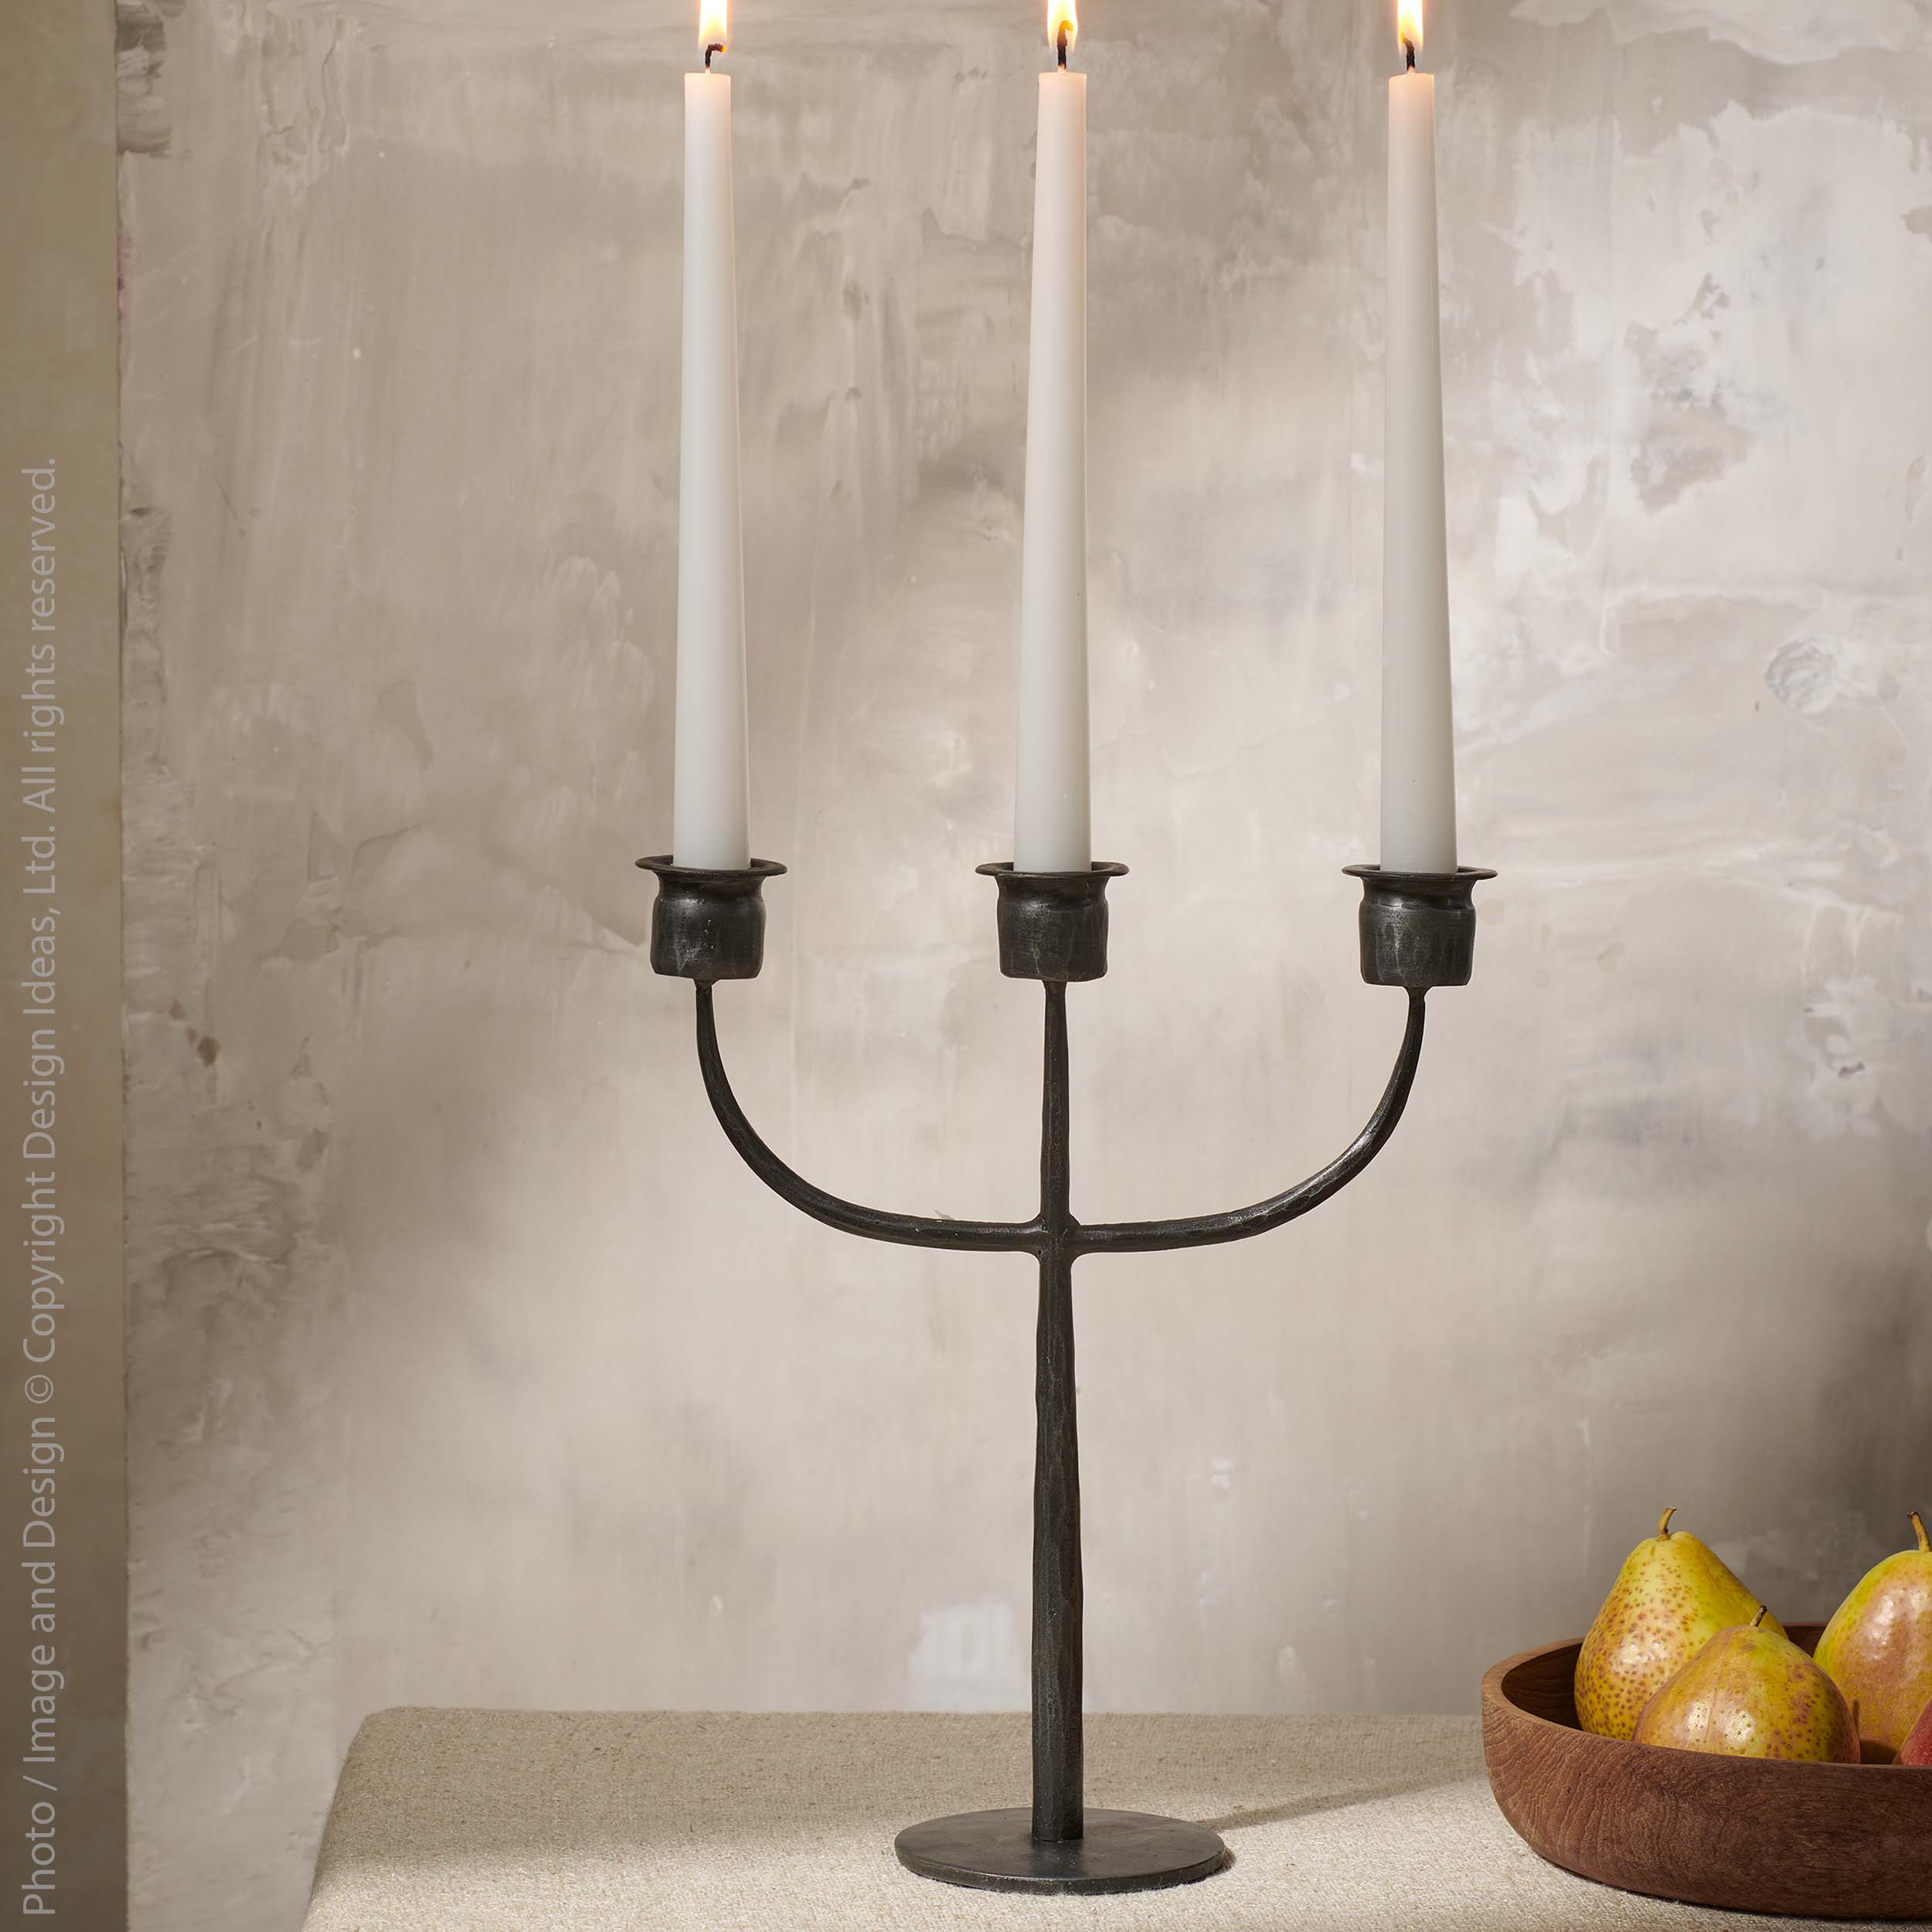 Revere™ Hand Forged Iron Candelabra - (colors: Black) | Premium Candleholder from the Revere™ collection | made with Iron for long lasting use